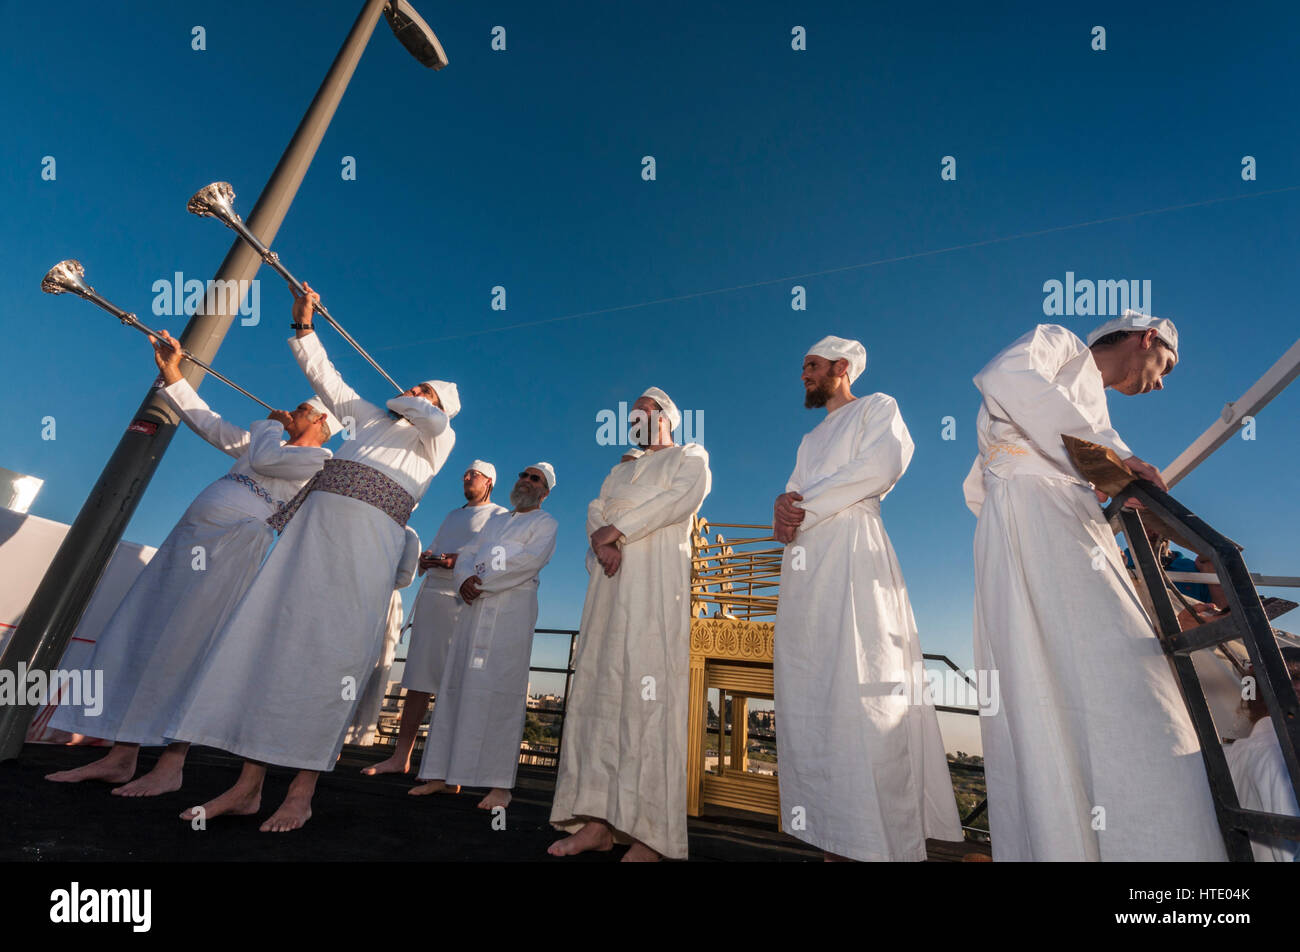 Jerusalem, Israel. A group of Cohanim (Members of the Levi Tribe) with horns during a simulation of the Passover ritual sacrifice. Stock Photo